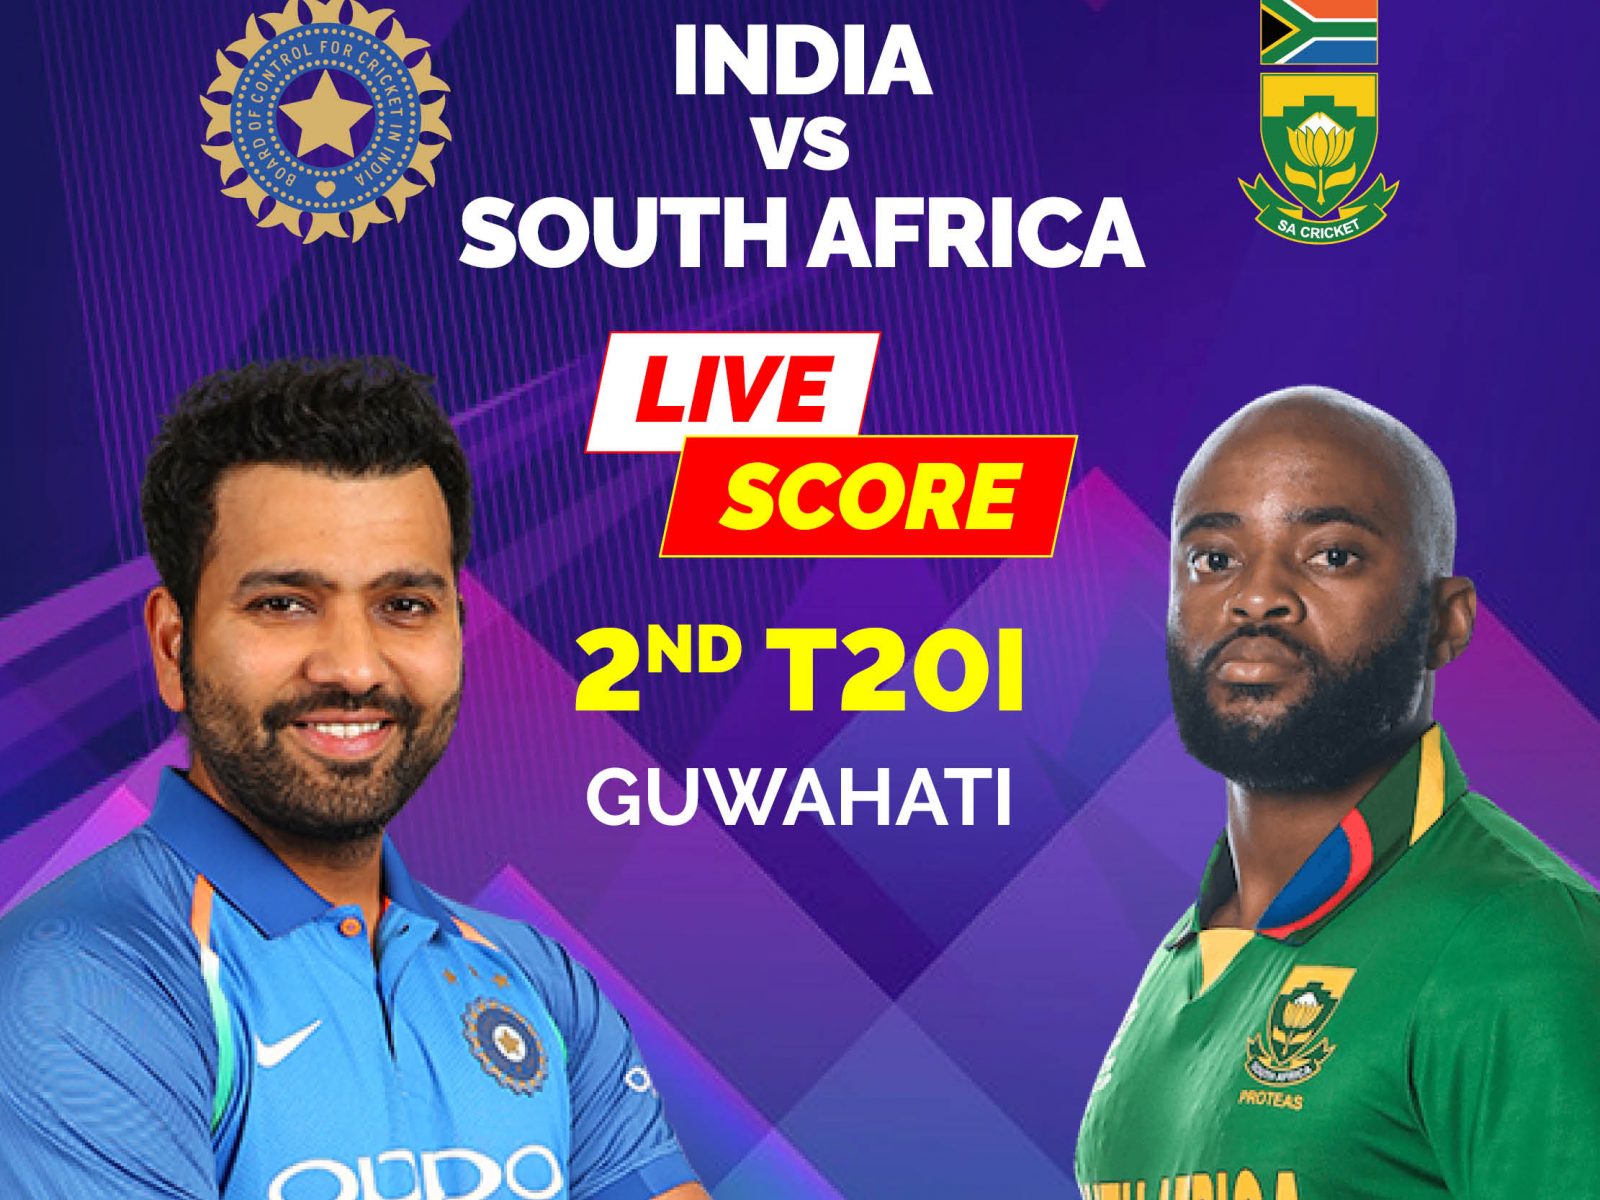 India vs South Africa Highlights 2nd T20I David Miller Hits Century in High-scoring Contest But IND Clinch Series